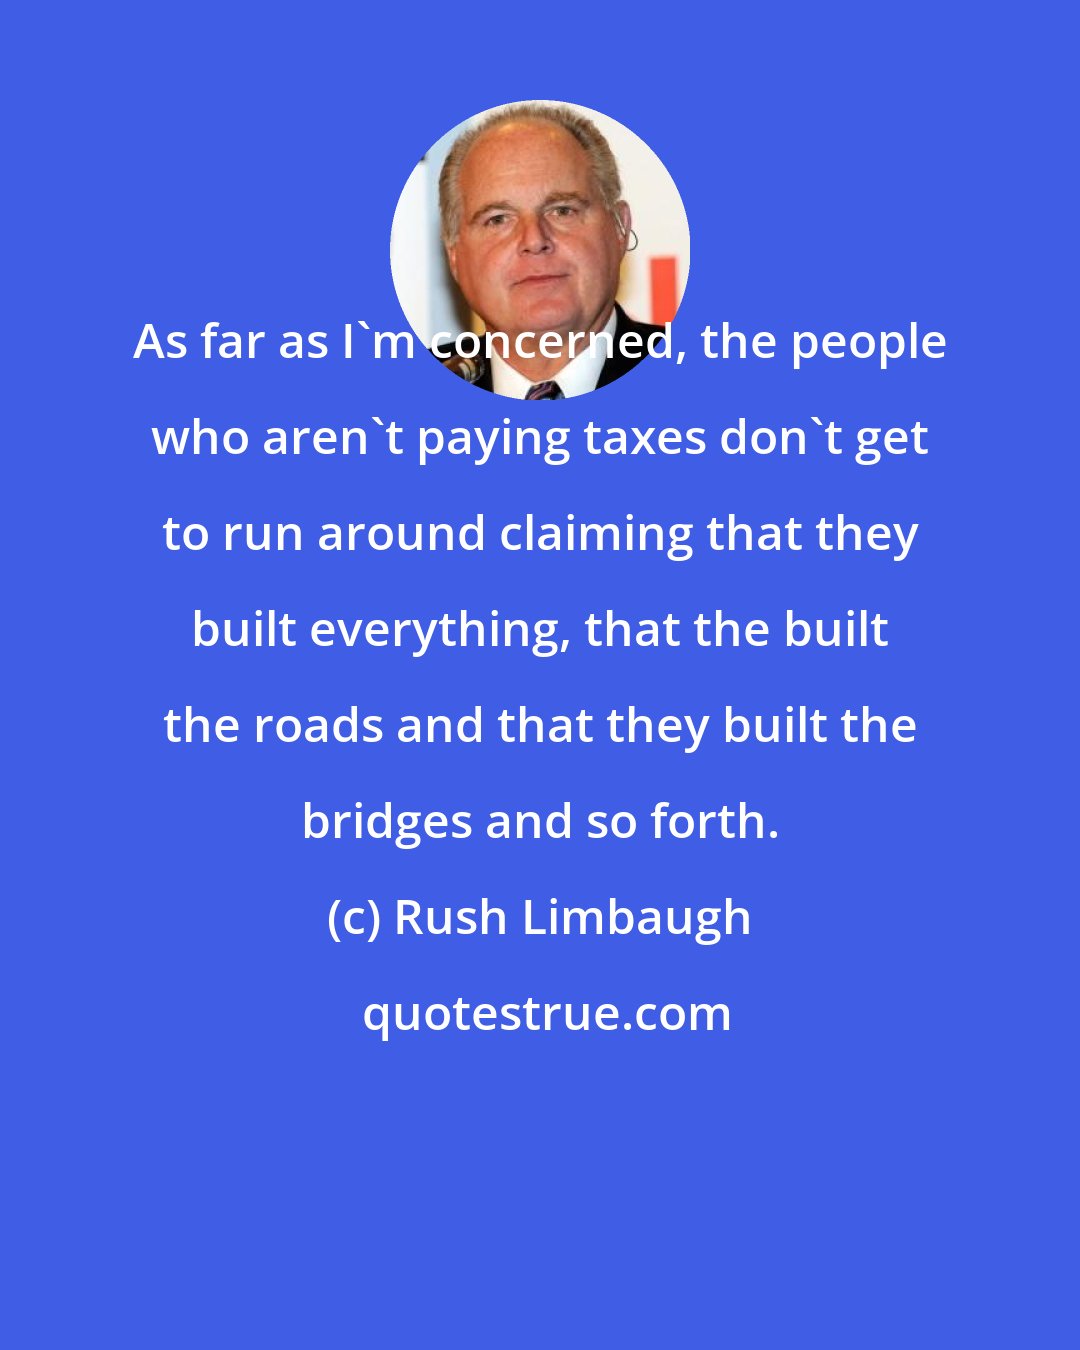 Rush Limbaugh: As far as I'm concerned, the people who aren't paying taxes don't get to run around claiming that they built everything, that the built the roads and that they built the bridges and so forth.